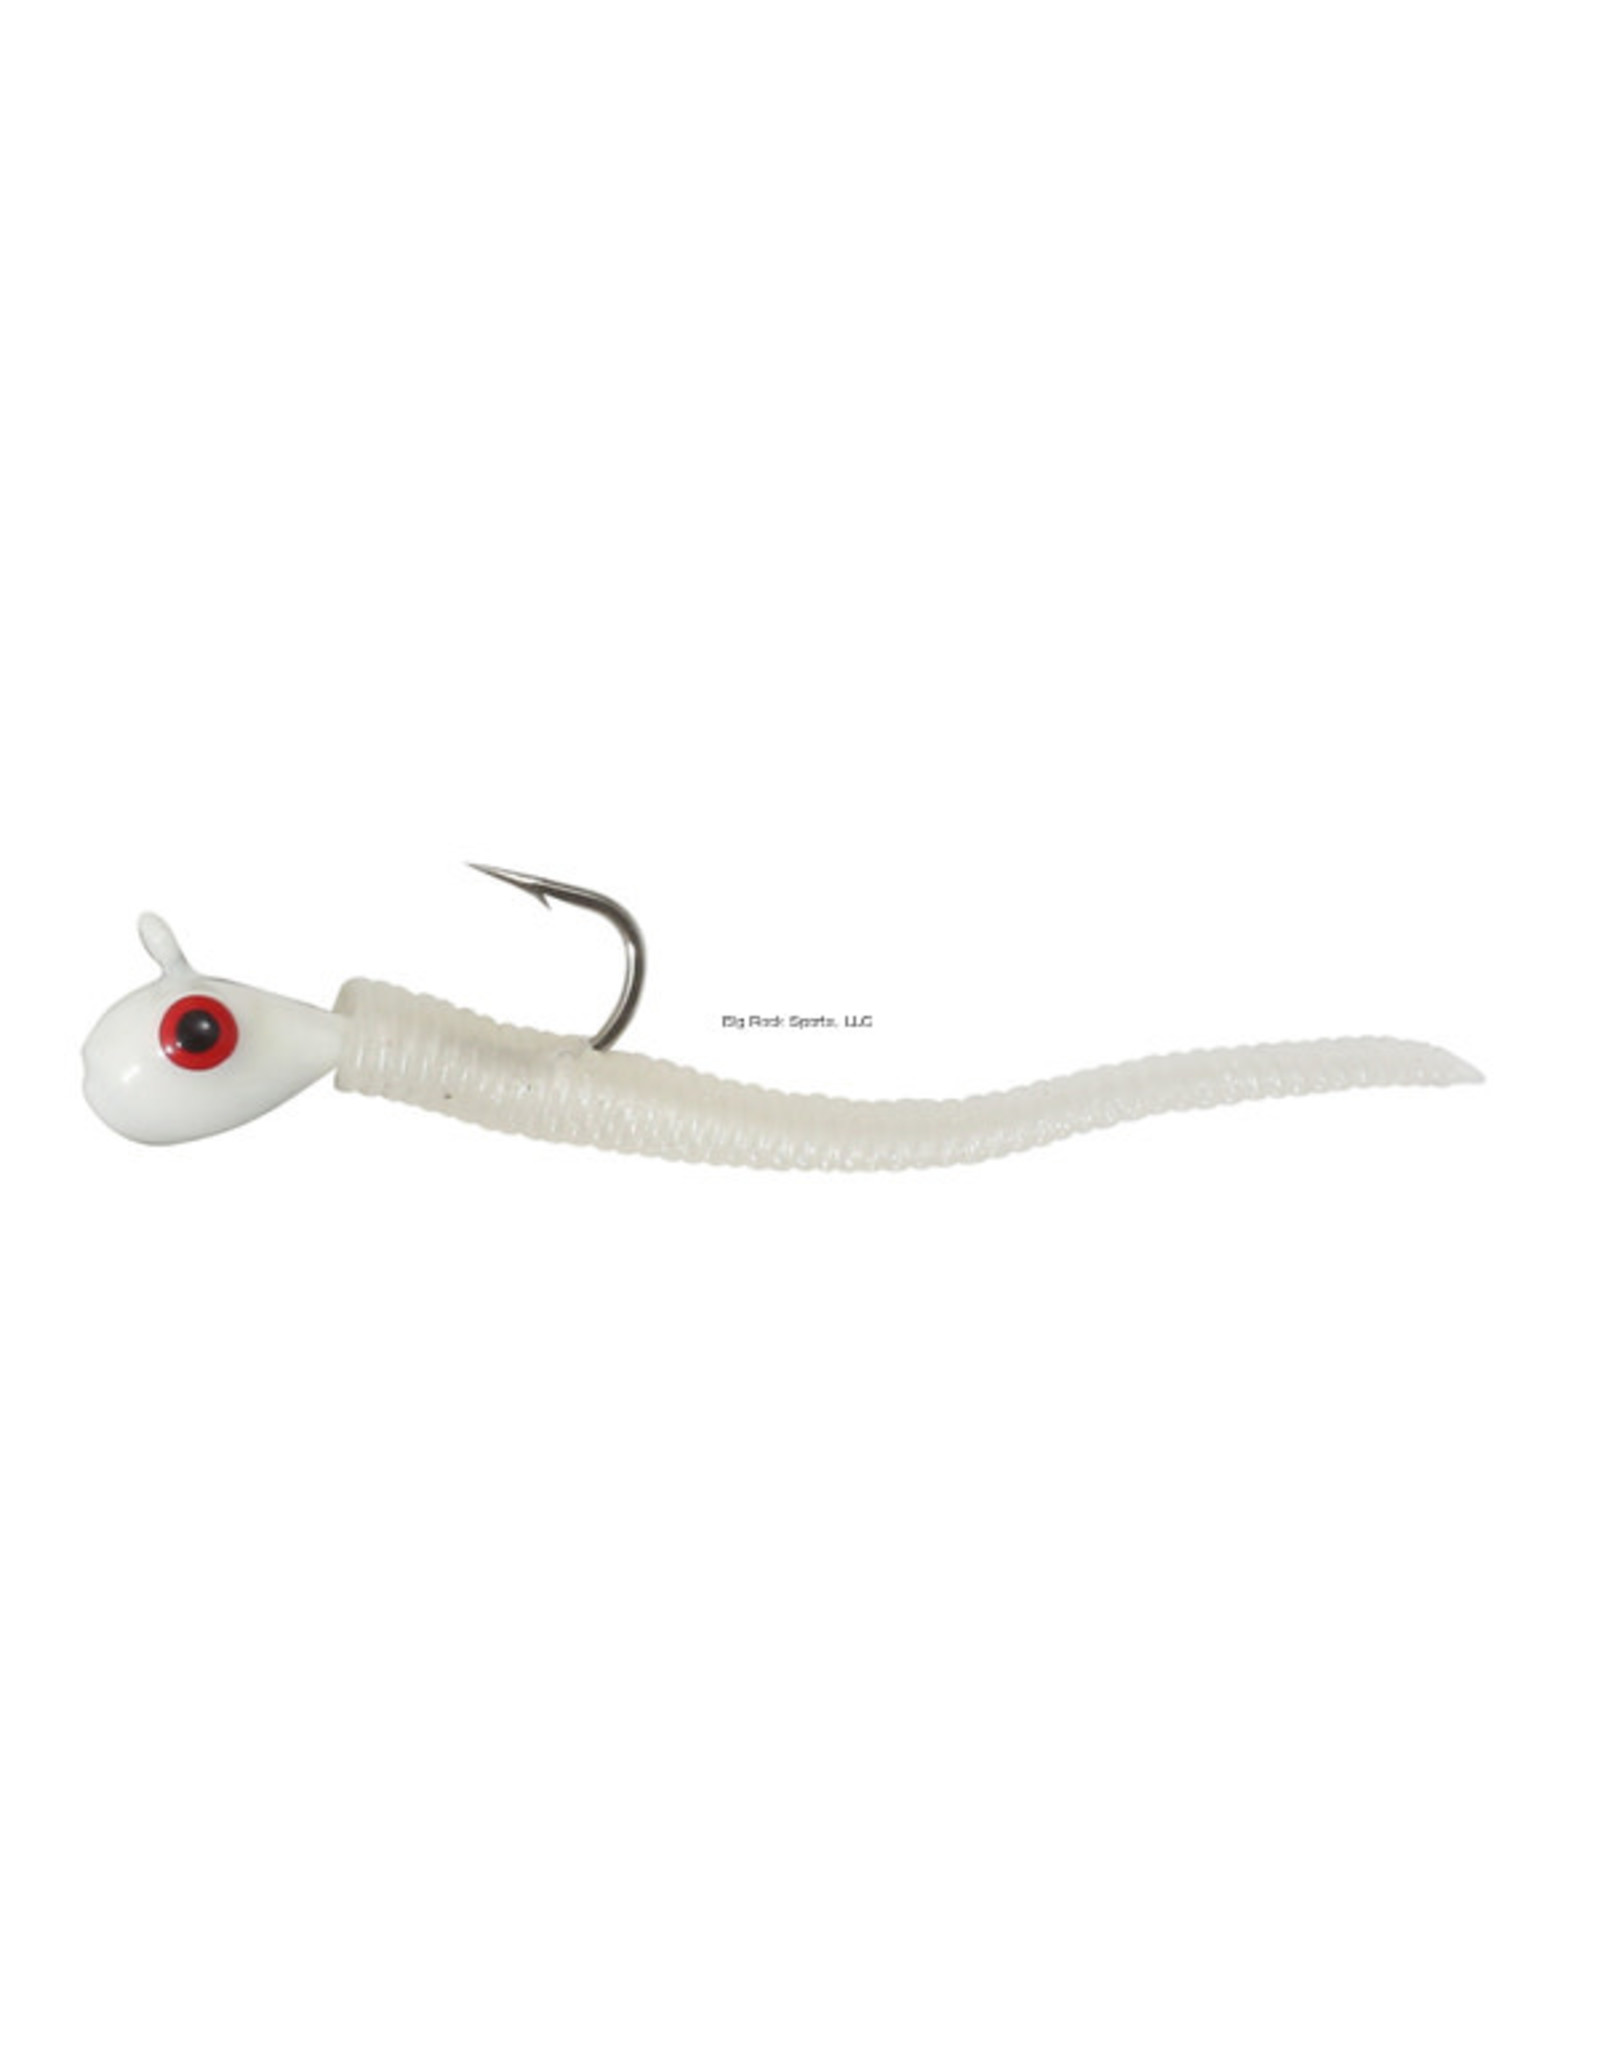 Northland Fishing Tackle Northland TBR10-13 Rigged Tungsten Bloodworm - 5/Card - 1/16oz - Glo White